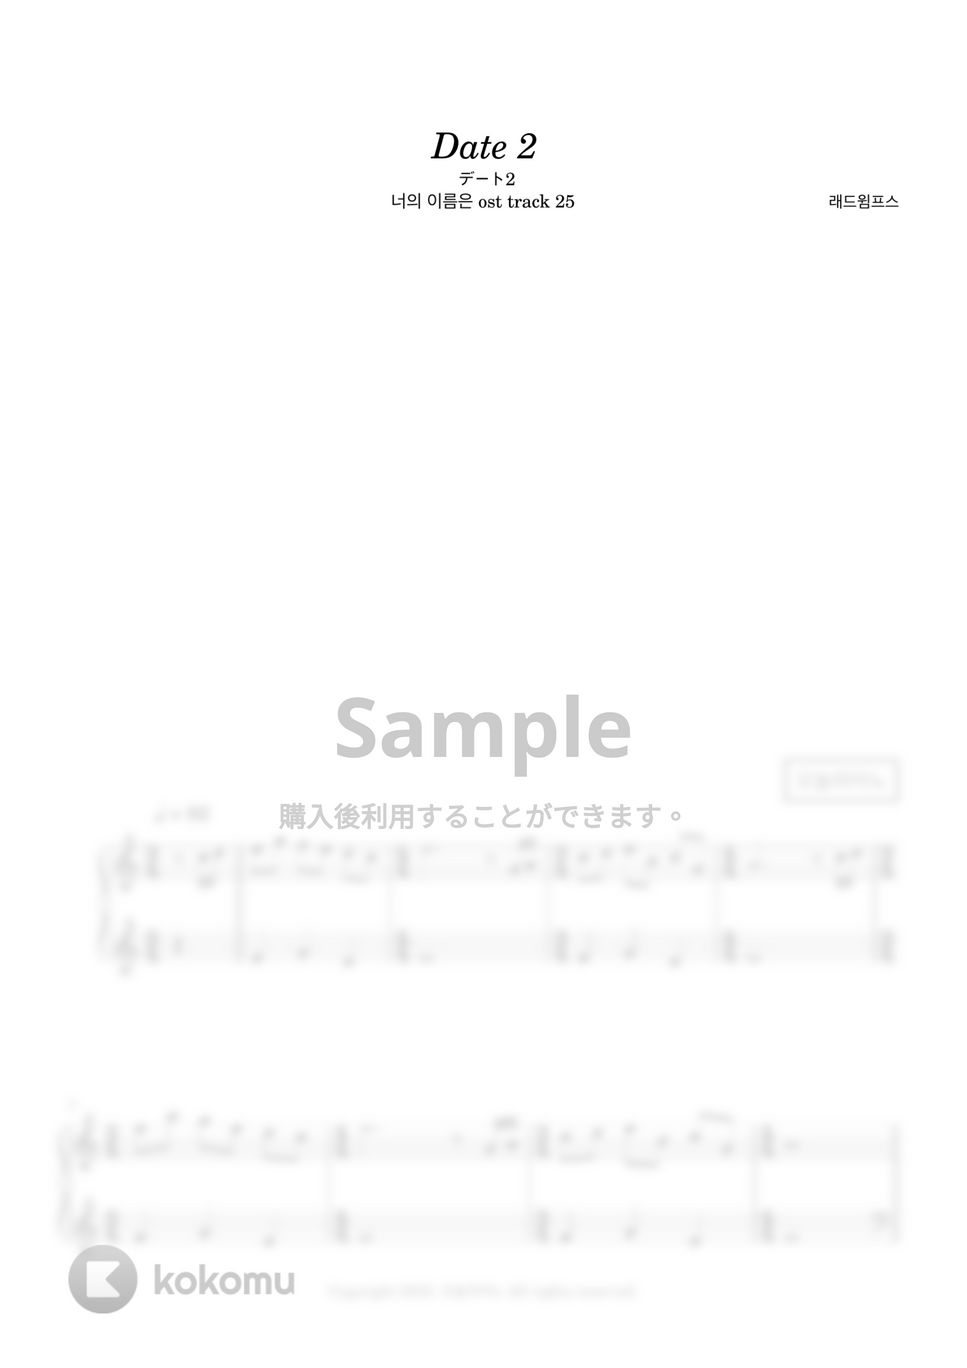 RADWIMPS - デート2(Date 2) (君の名は ost track 25) by 今日ピアノ(Oneul Piano)